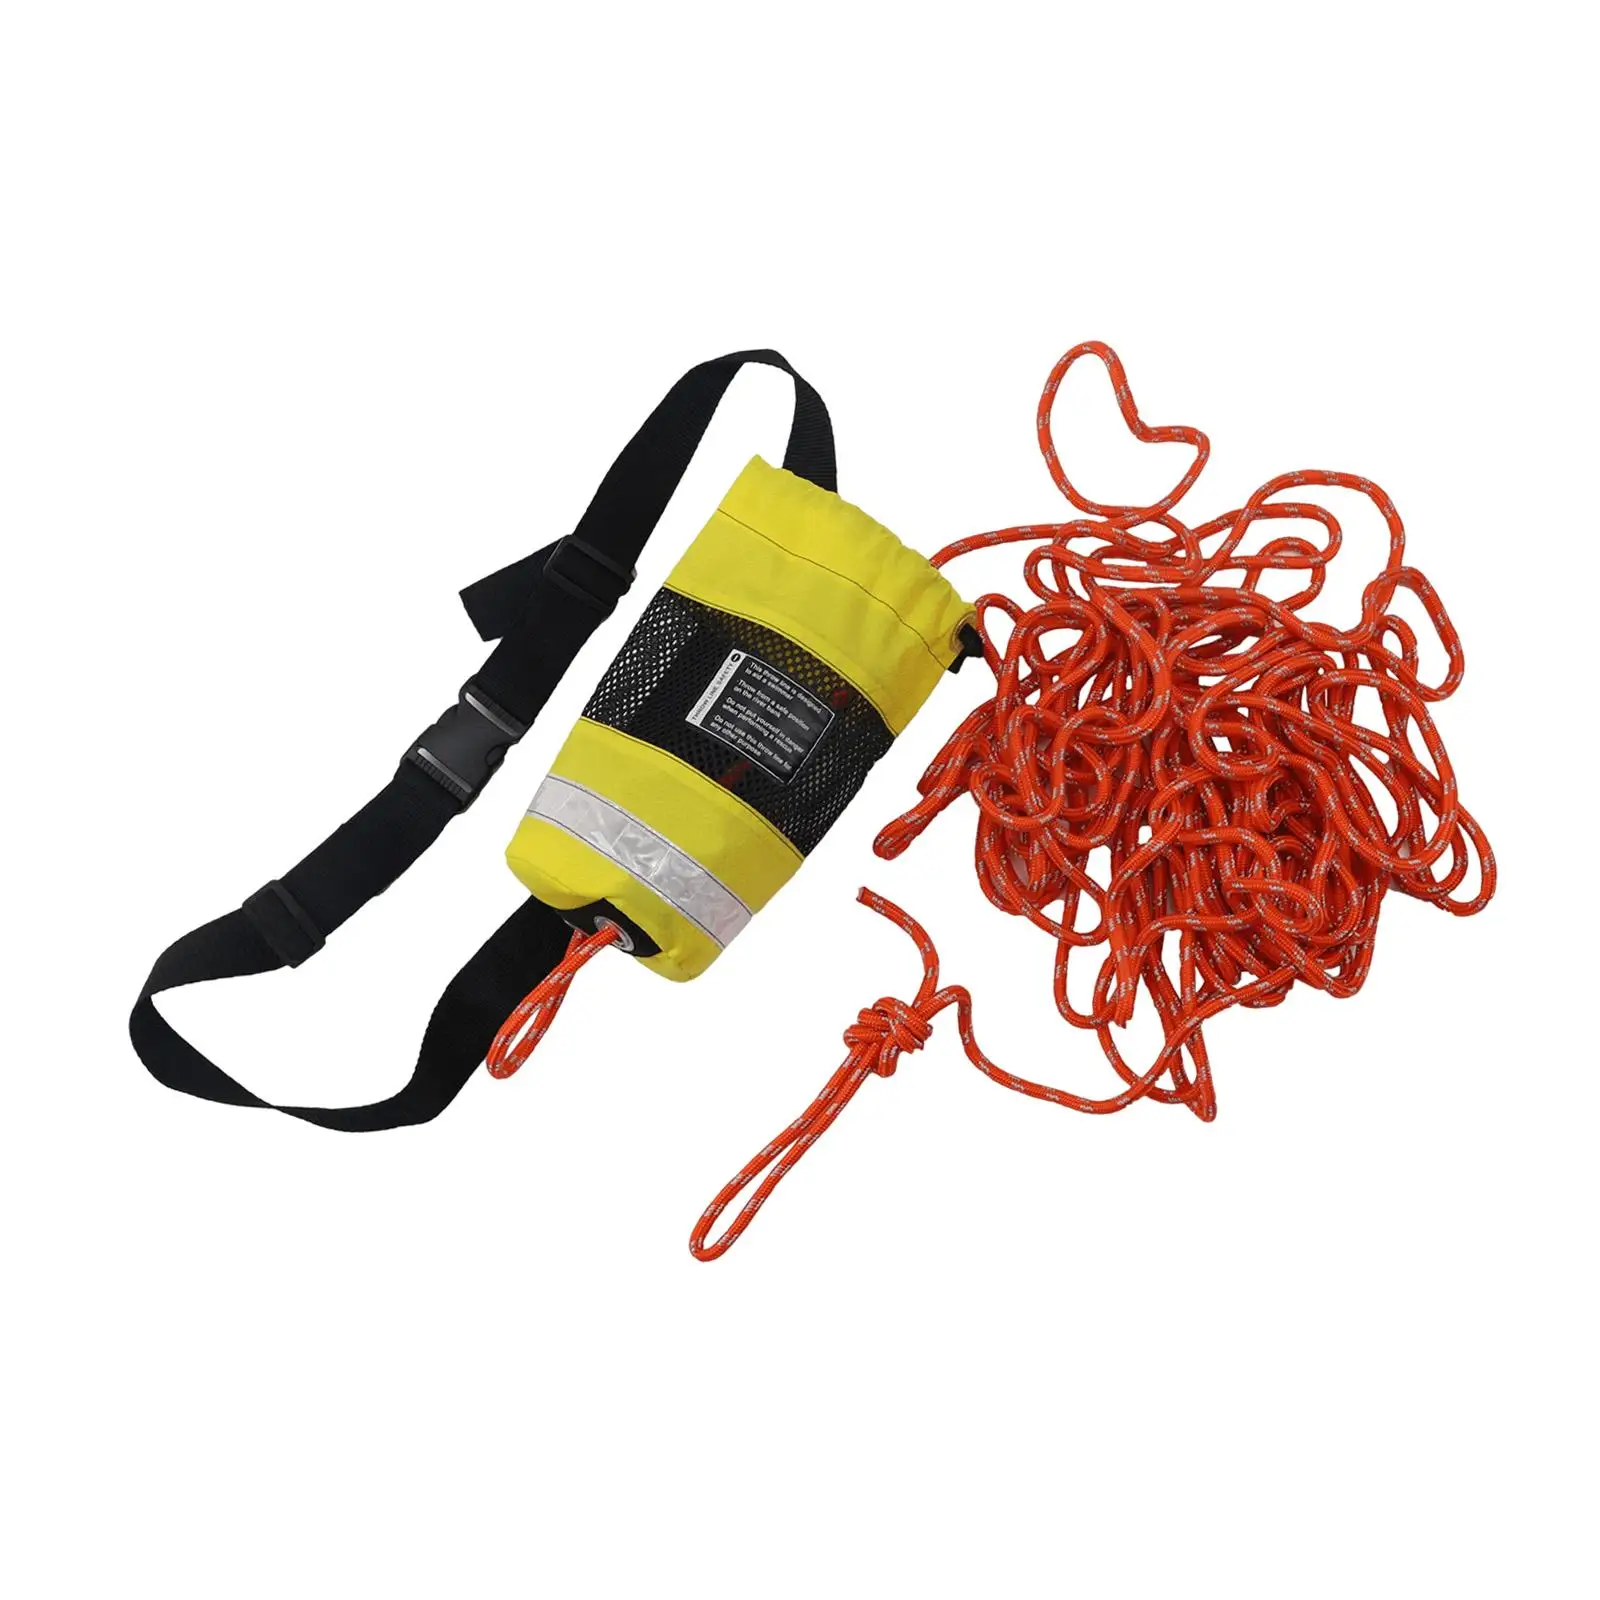 Portable Rope Throw Bag Reflective High Visibility 21M Length for Boating, Water Sports Kayaking, Sailing, Accessory